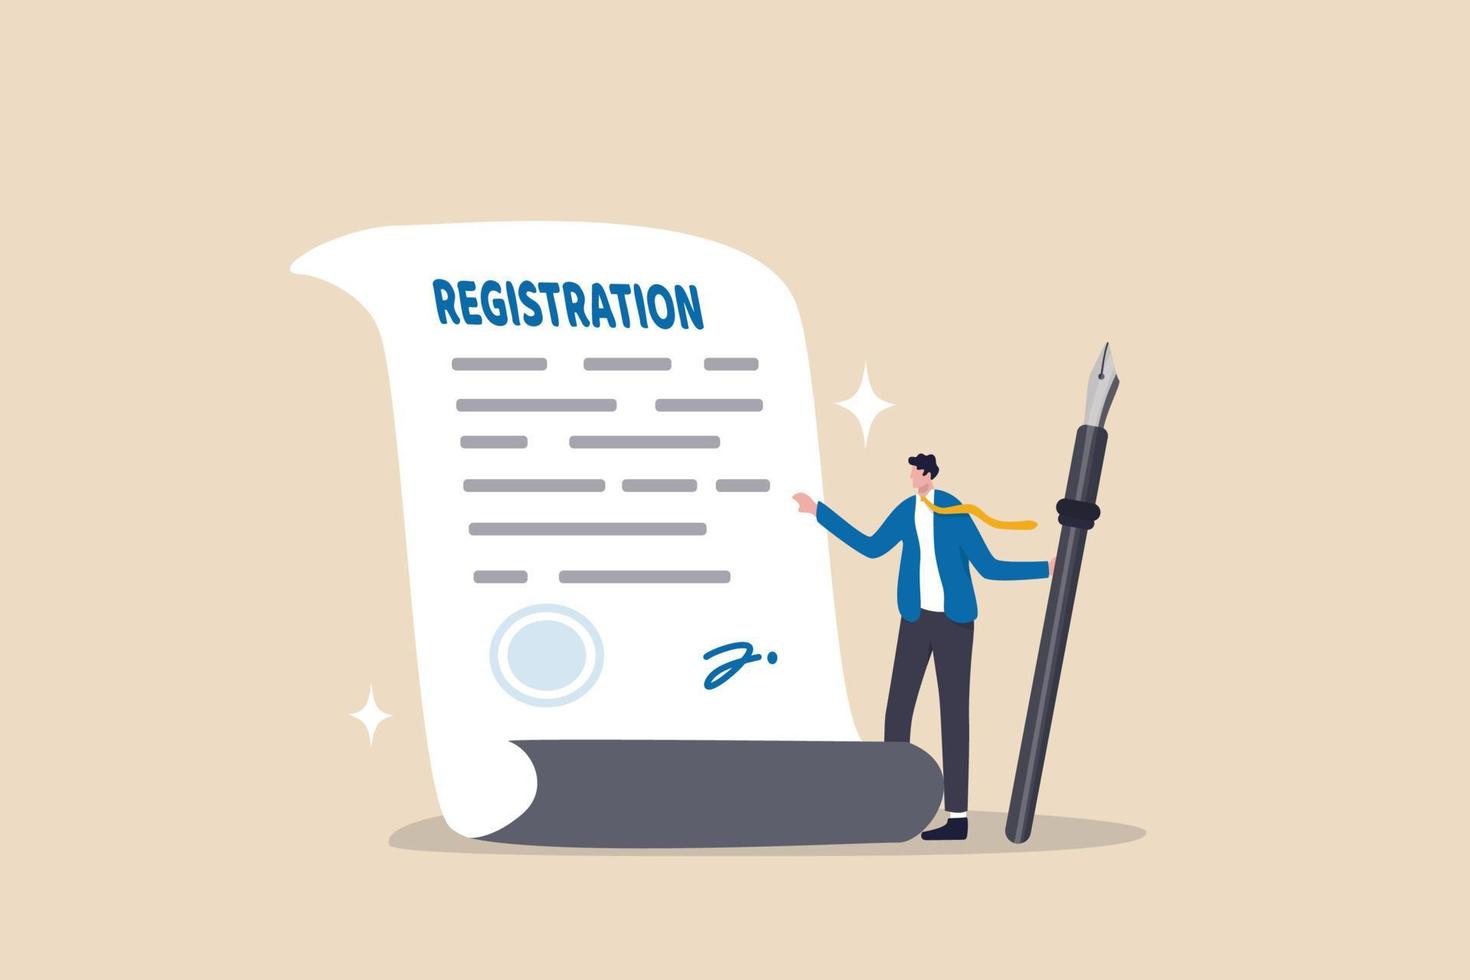 Company registration service, start new business, legal term or ownership entrepreneur assistant, confidence businessman holding pen success sign company document with stamped. vector